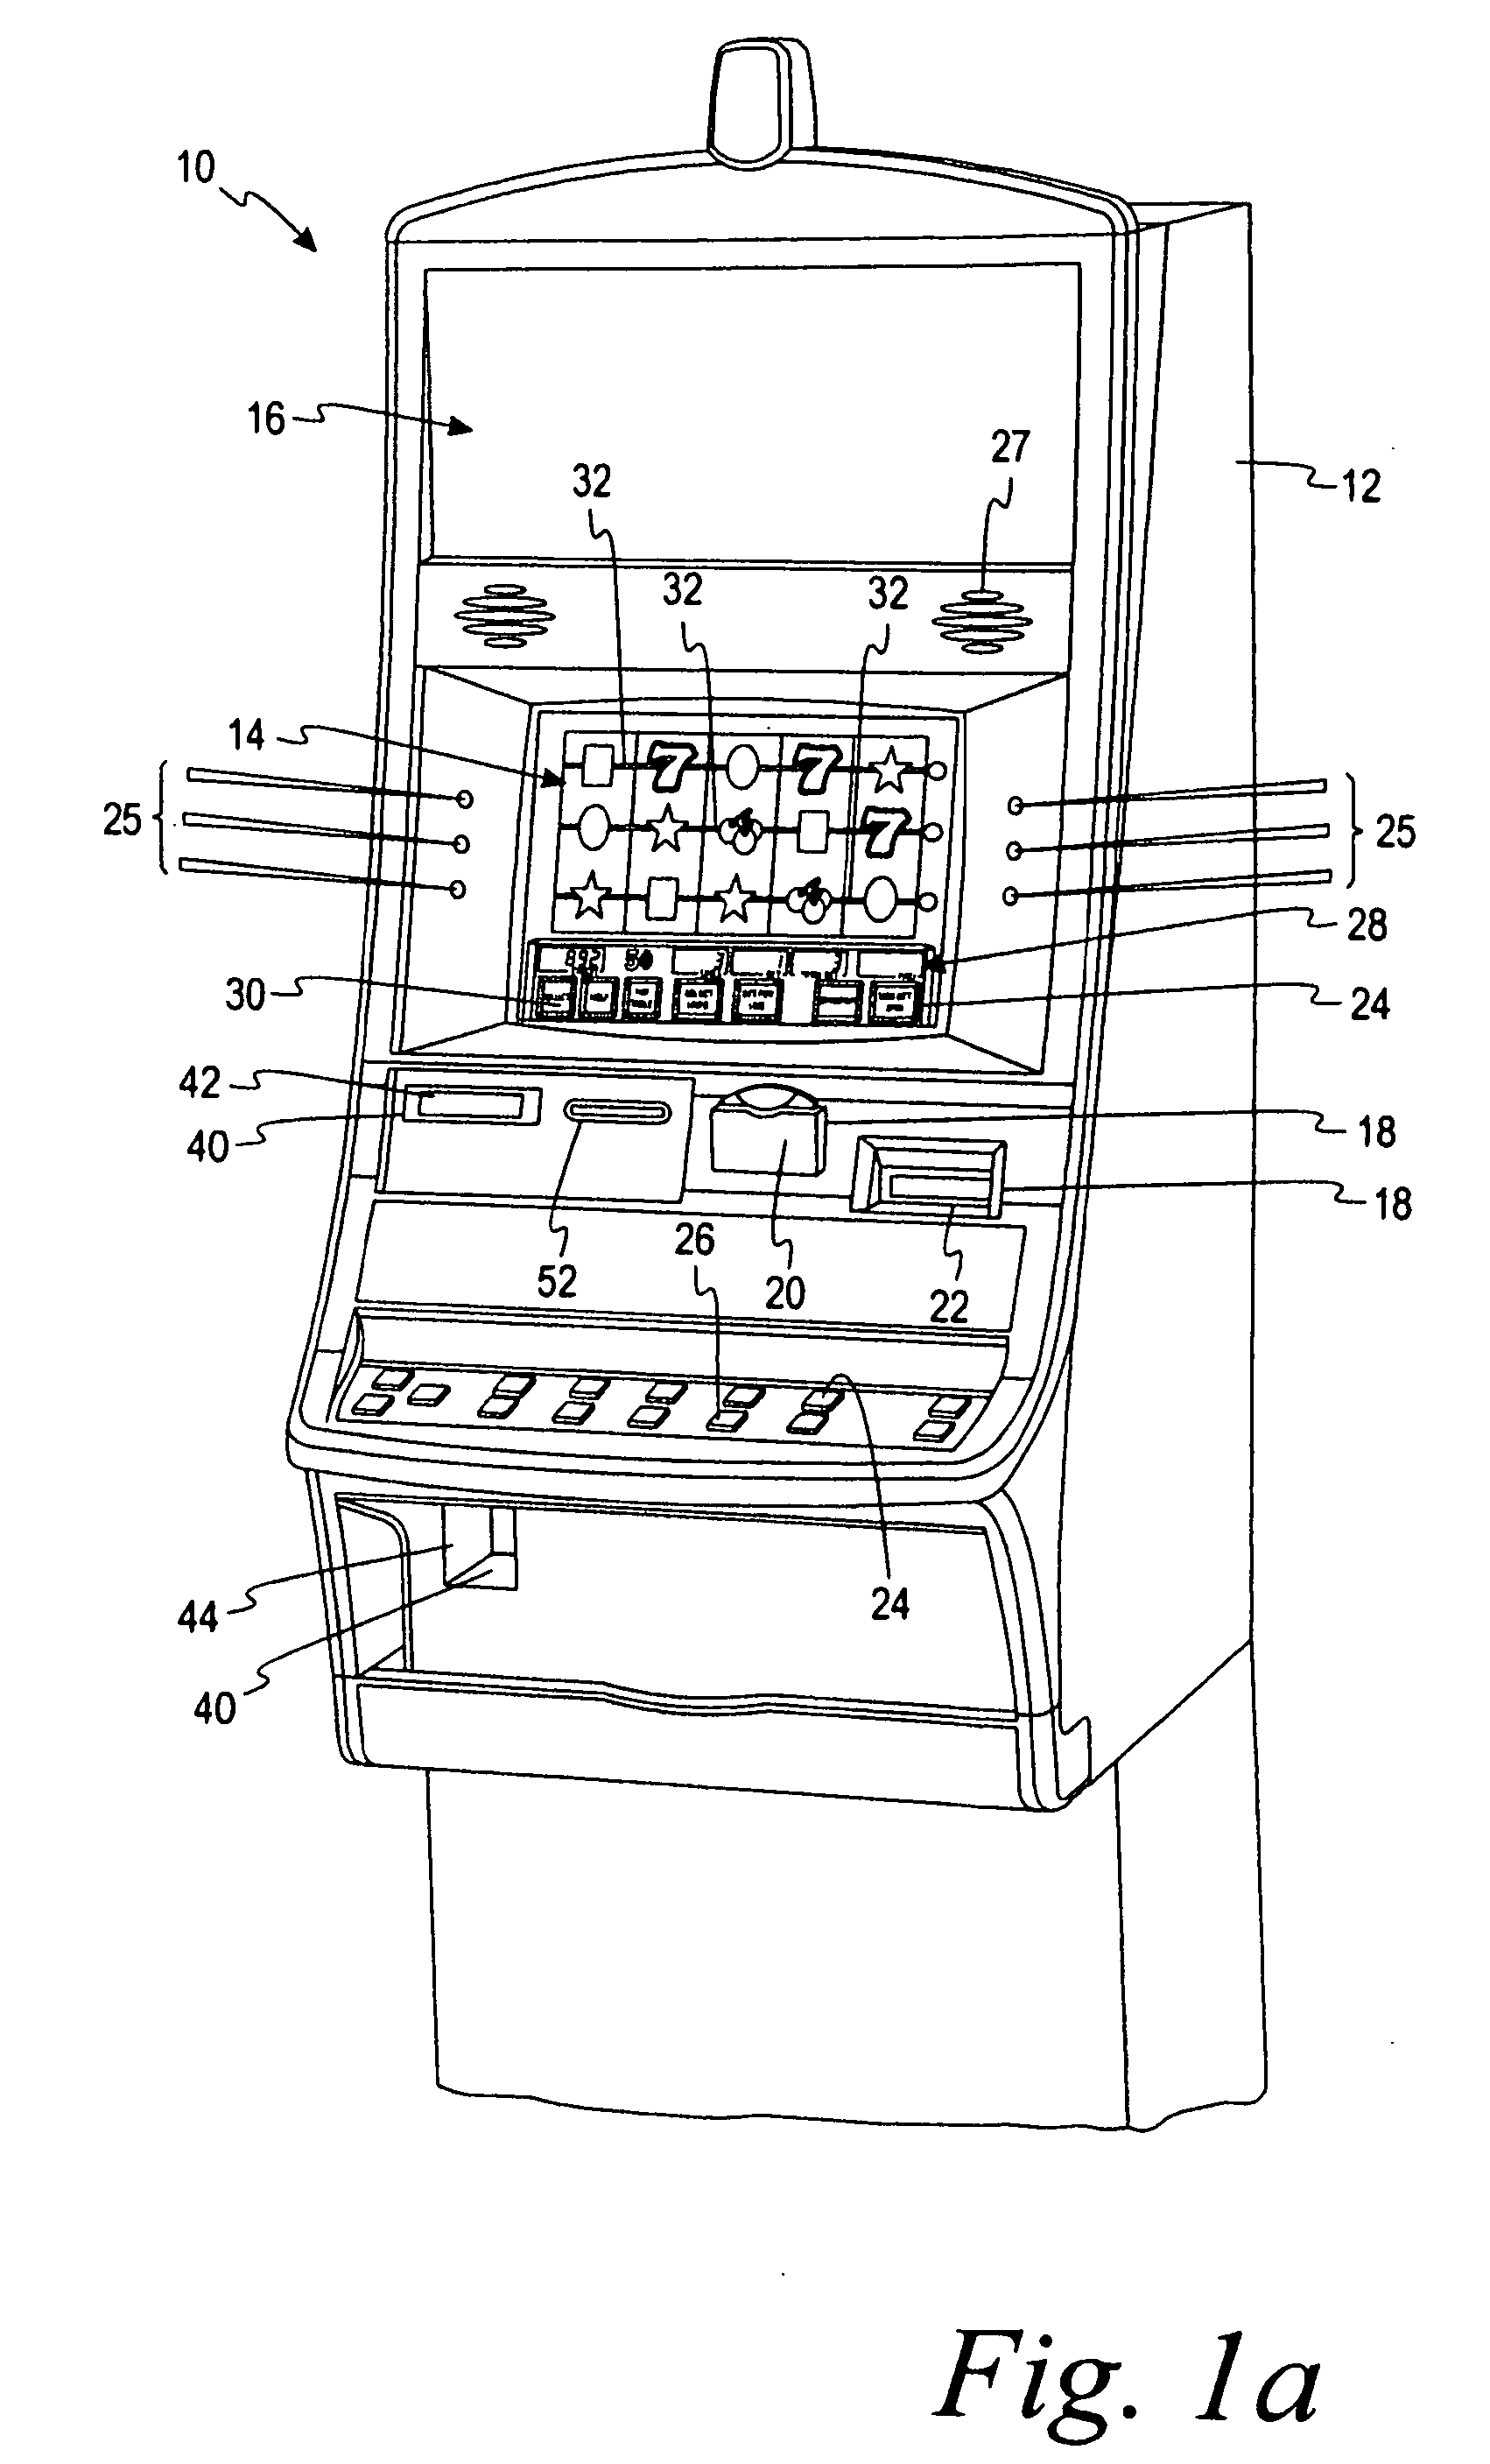 Multi-player, multi-touch table for use in wagering game systems